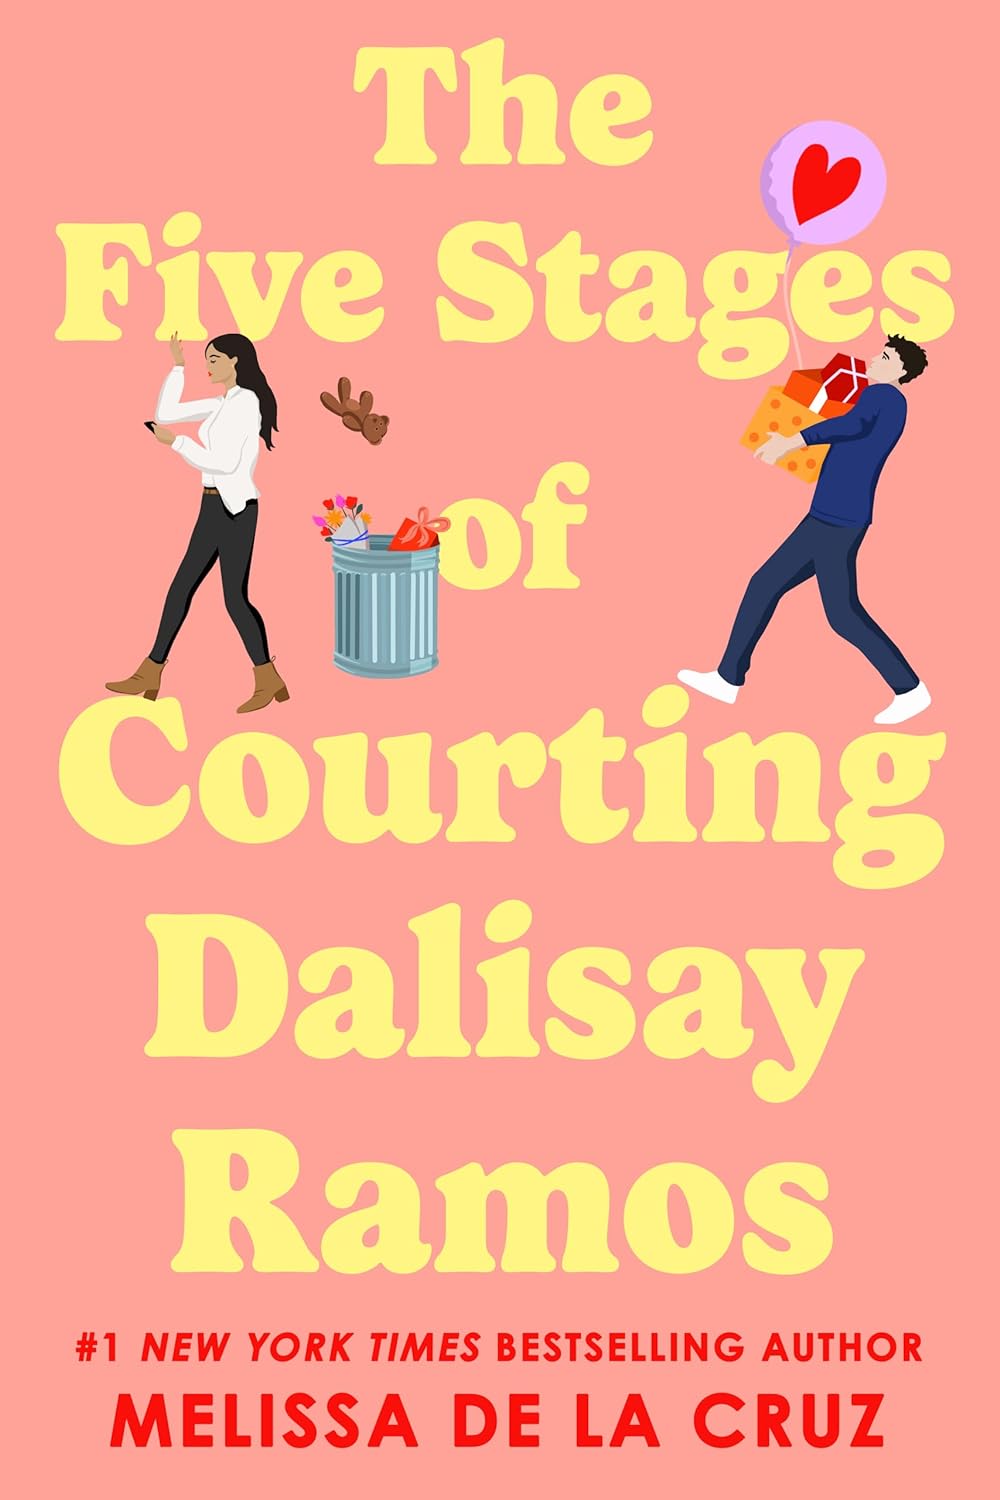 The Five Stages of Courting Dalisay Ramos by Melissa de la Cruz